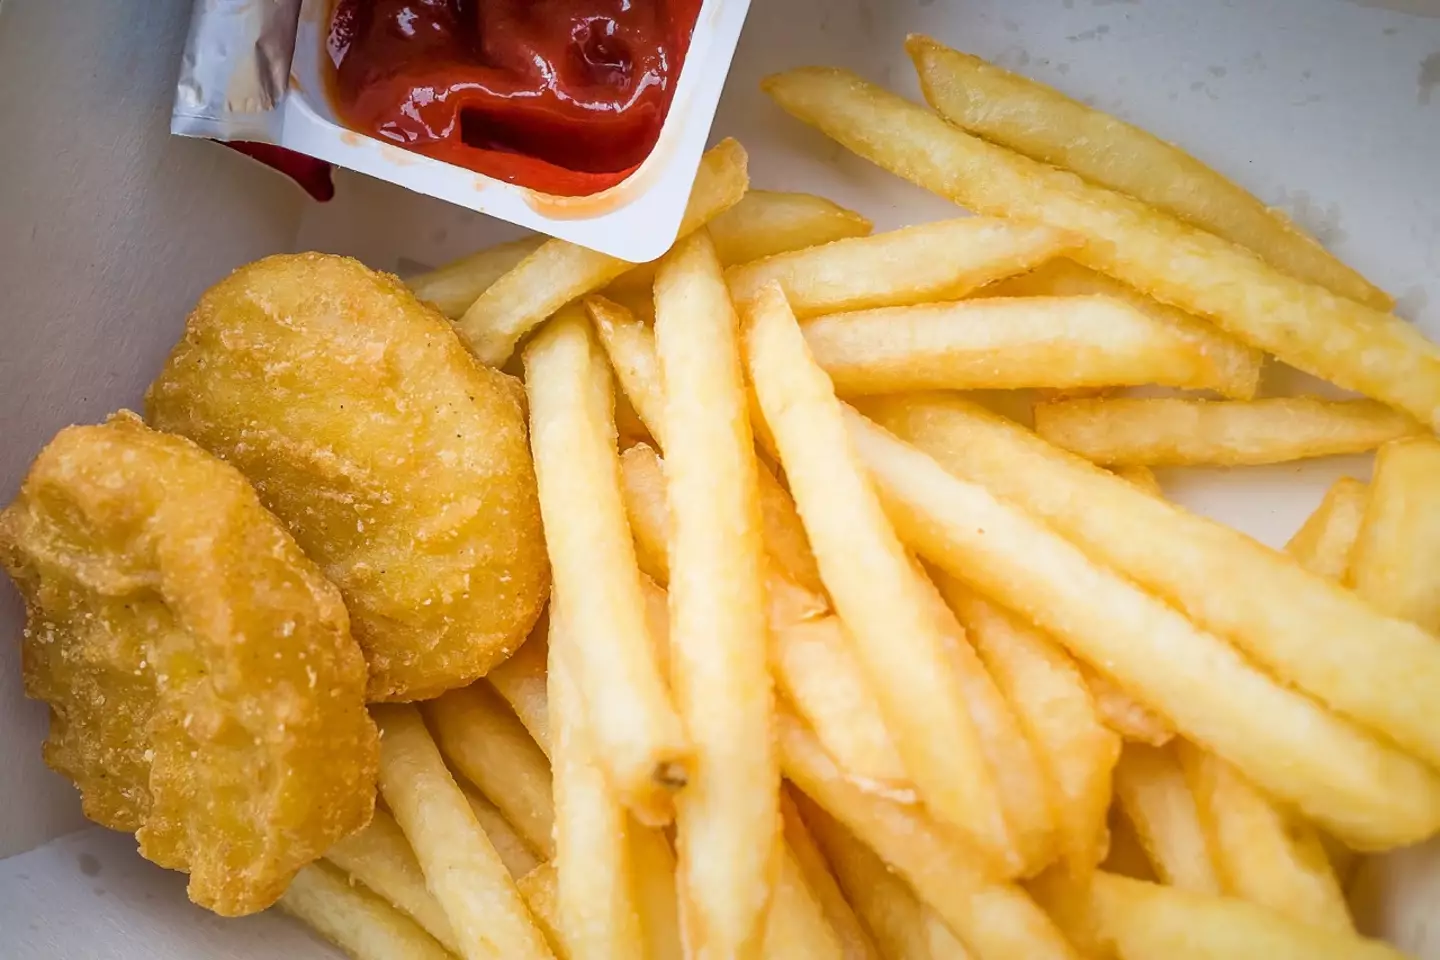 A furious mum wanted her babysitter to pay for 'emotional damage' after feeding her vegetarian children chicken nuggets.